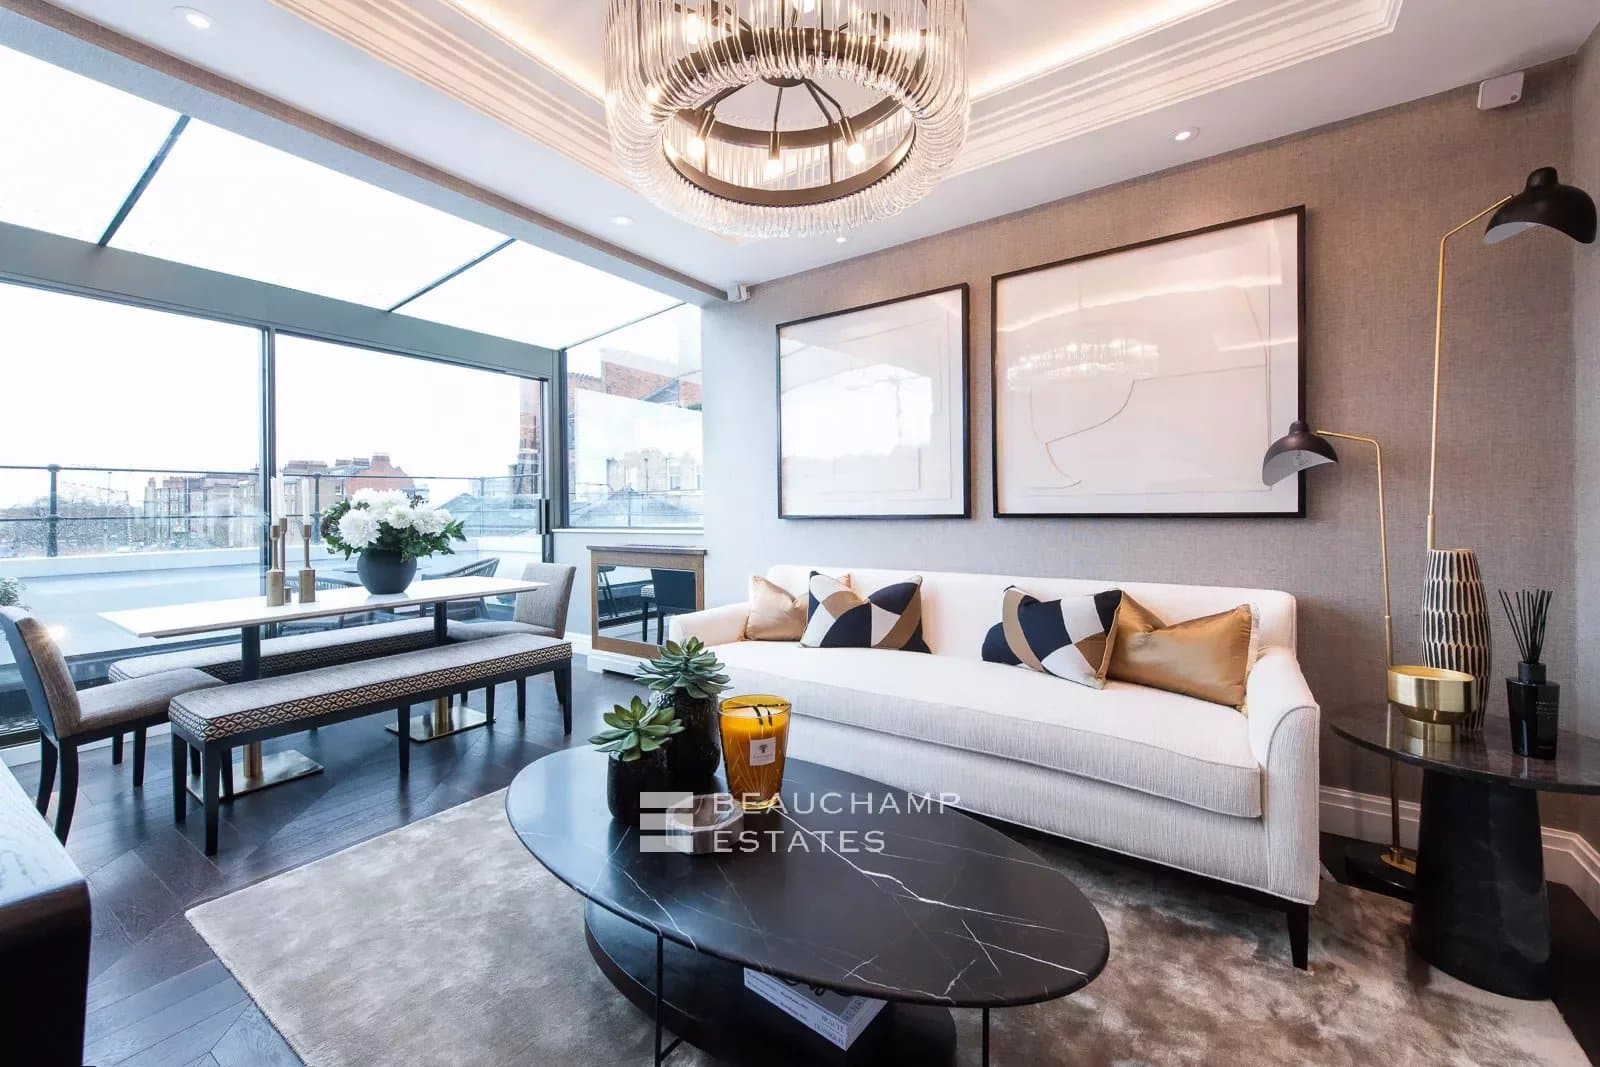 Two-bedroom apartment with a conservatory and private terrace providing spectacular views over Kensington. 2024